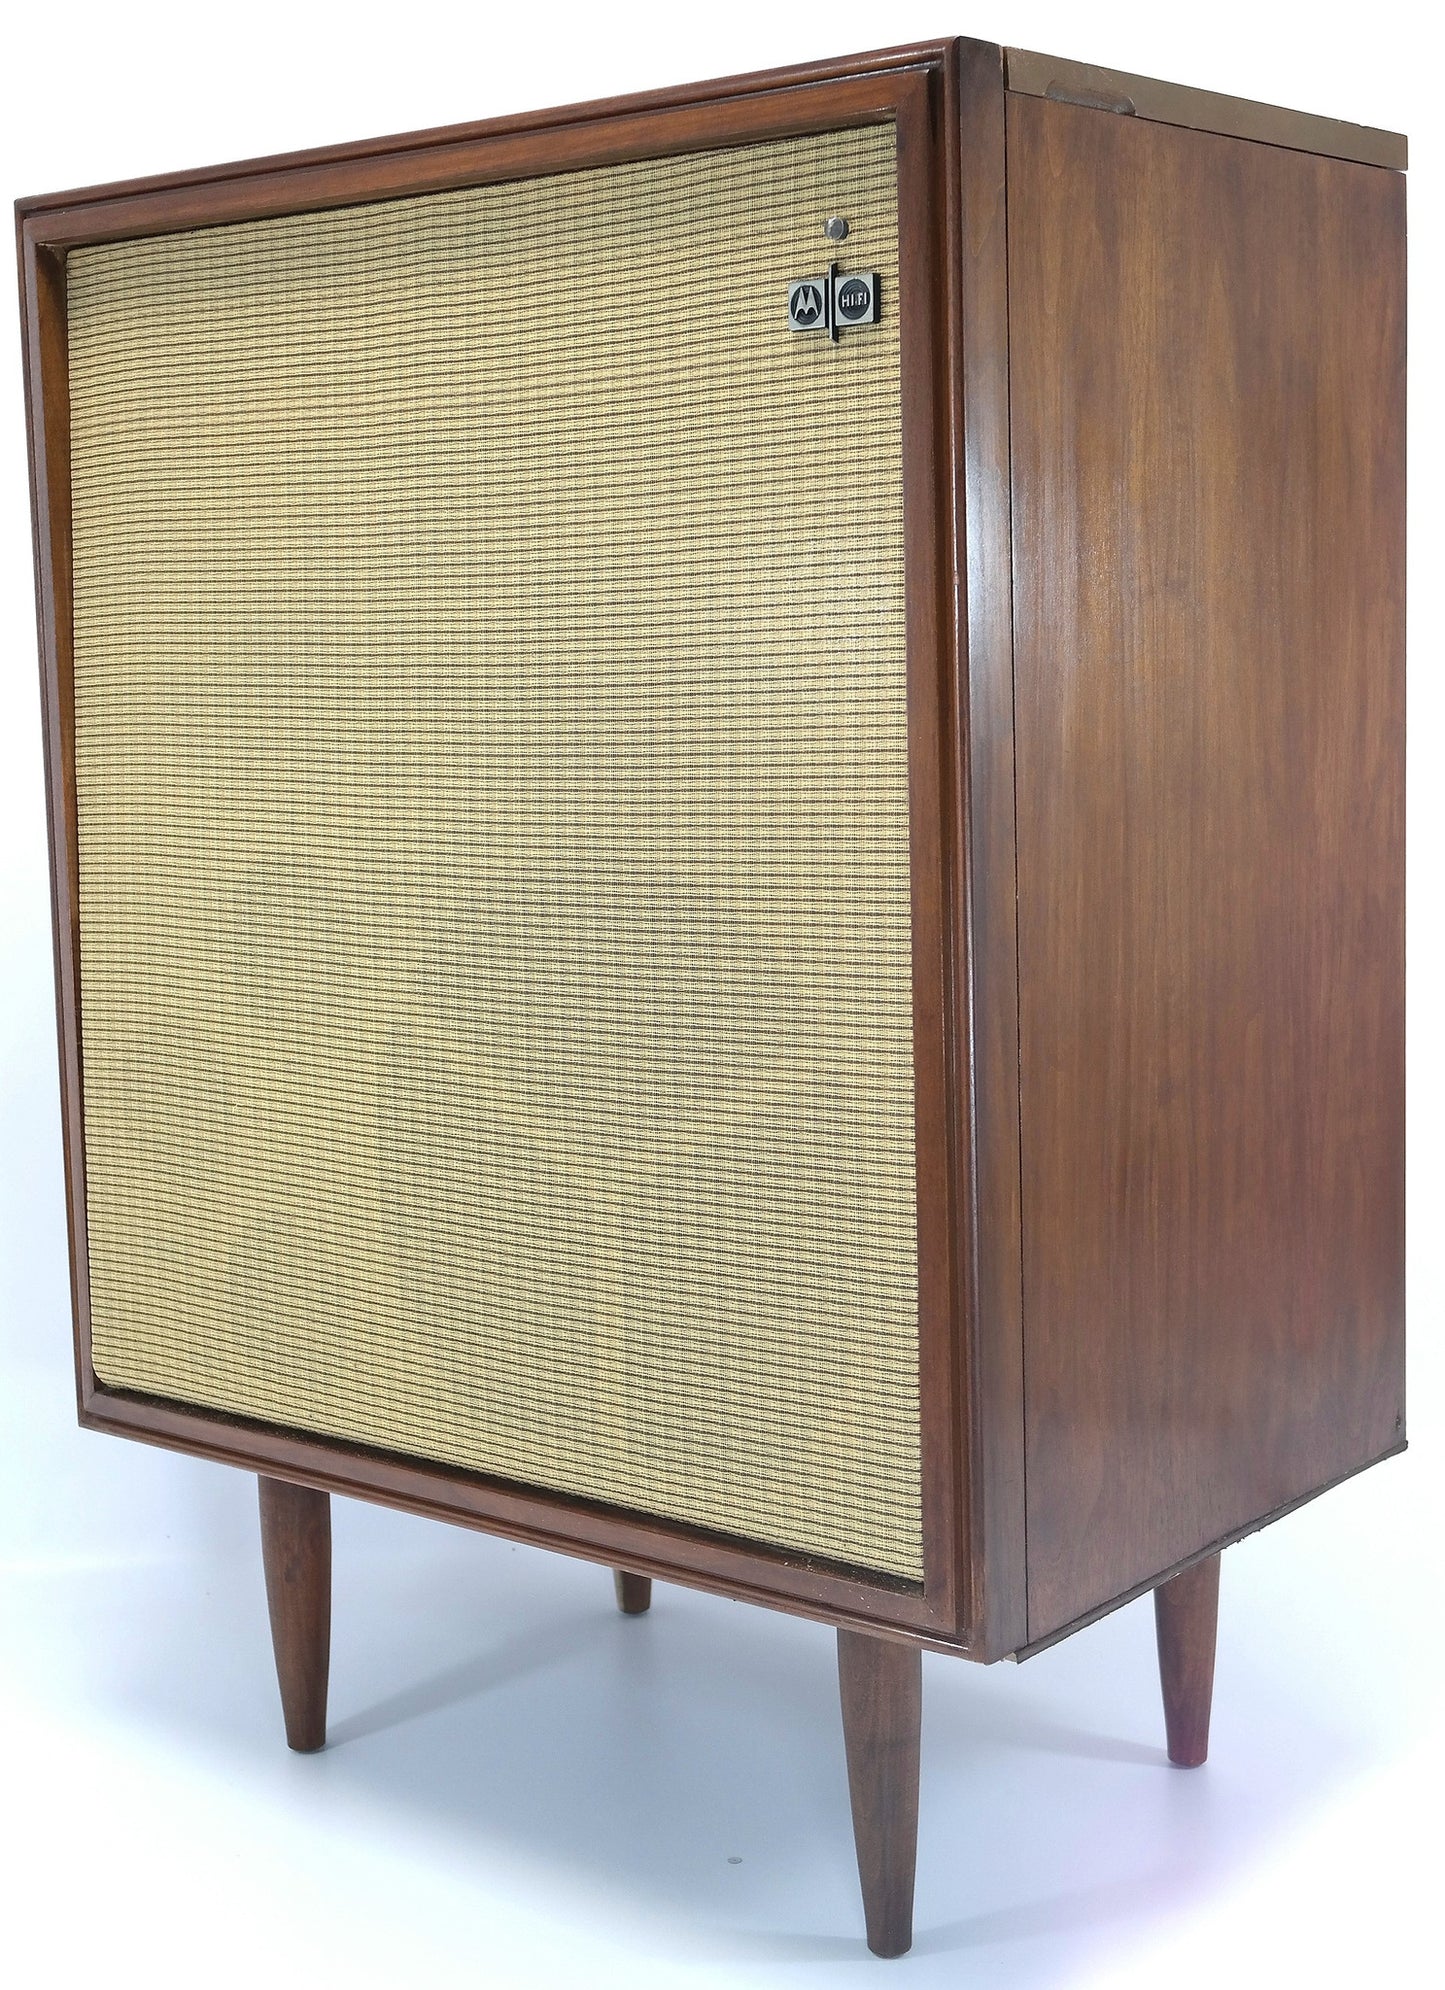 MCM STEREO - 60's - Mid Century Motorola Record Player - Bluetooth iPod iPhone Android The Vintedge Co.